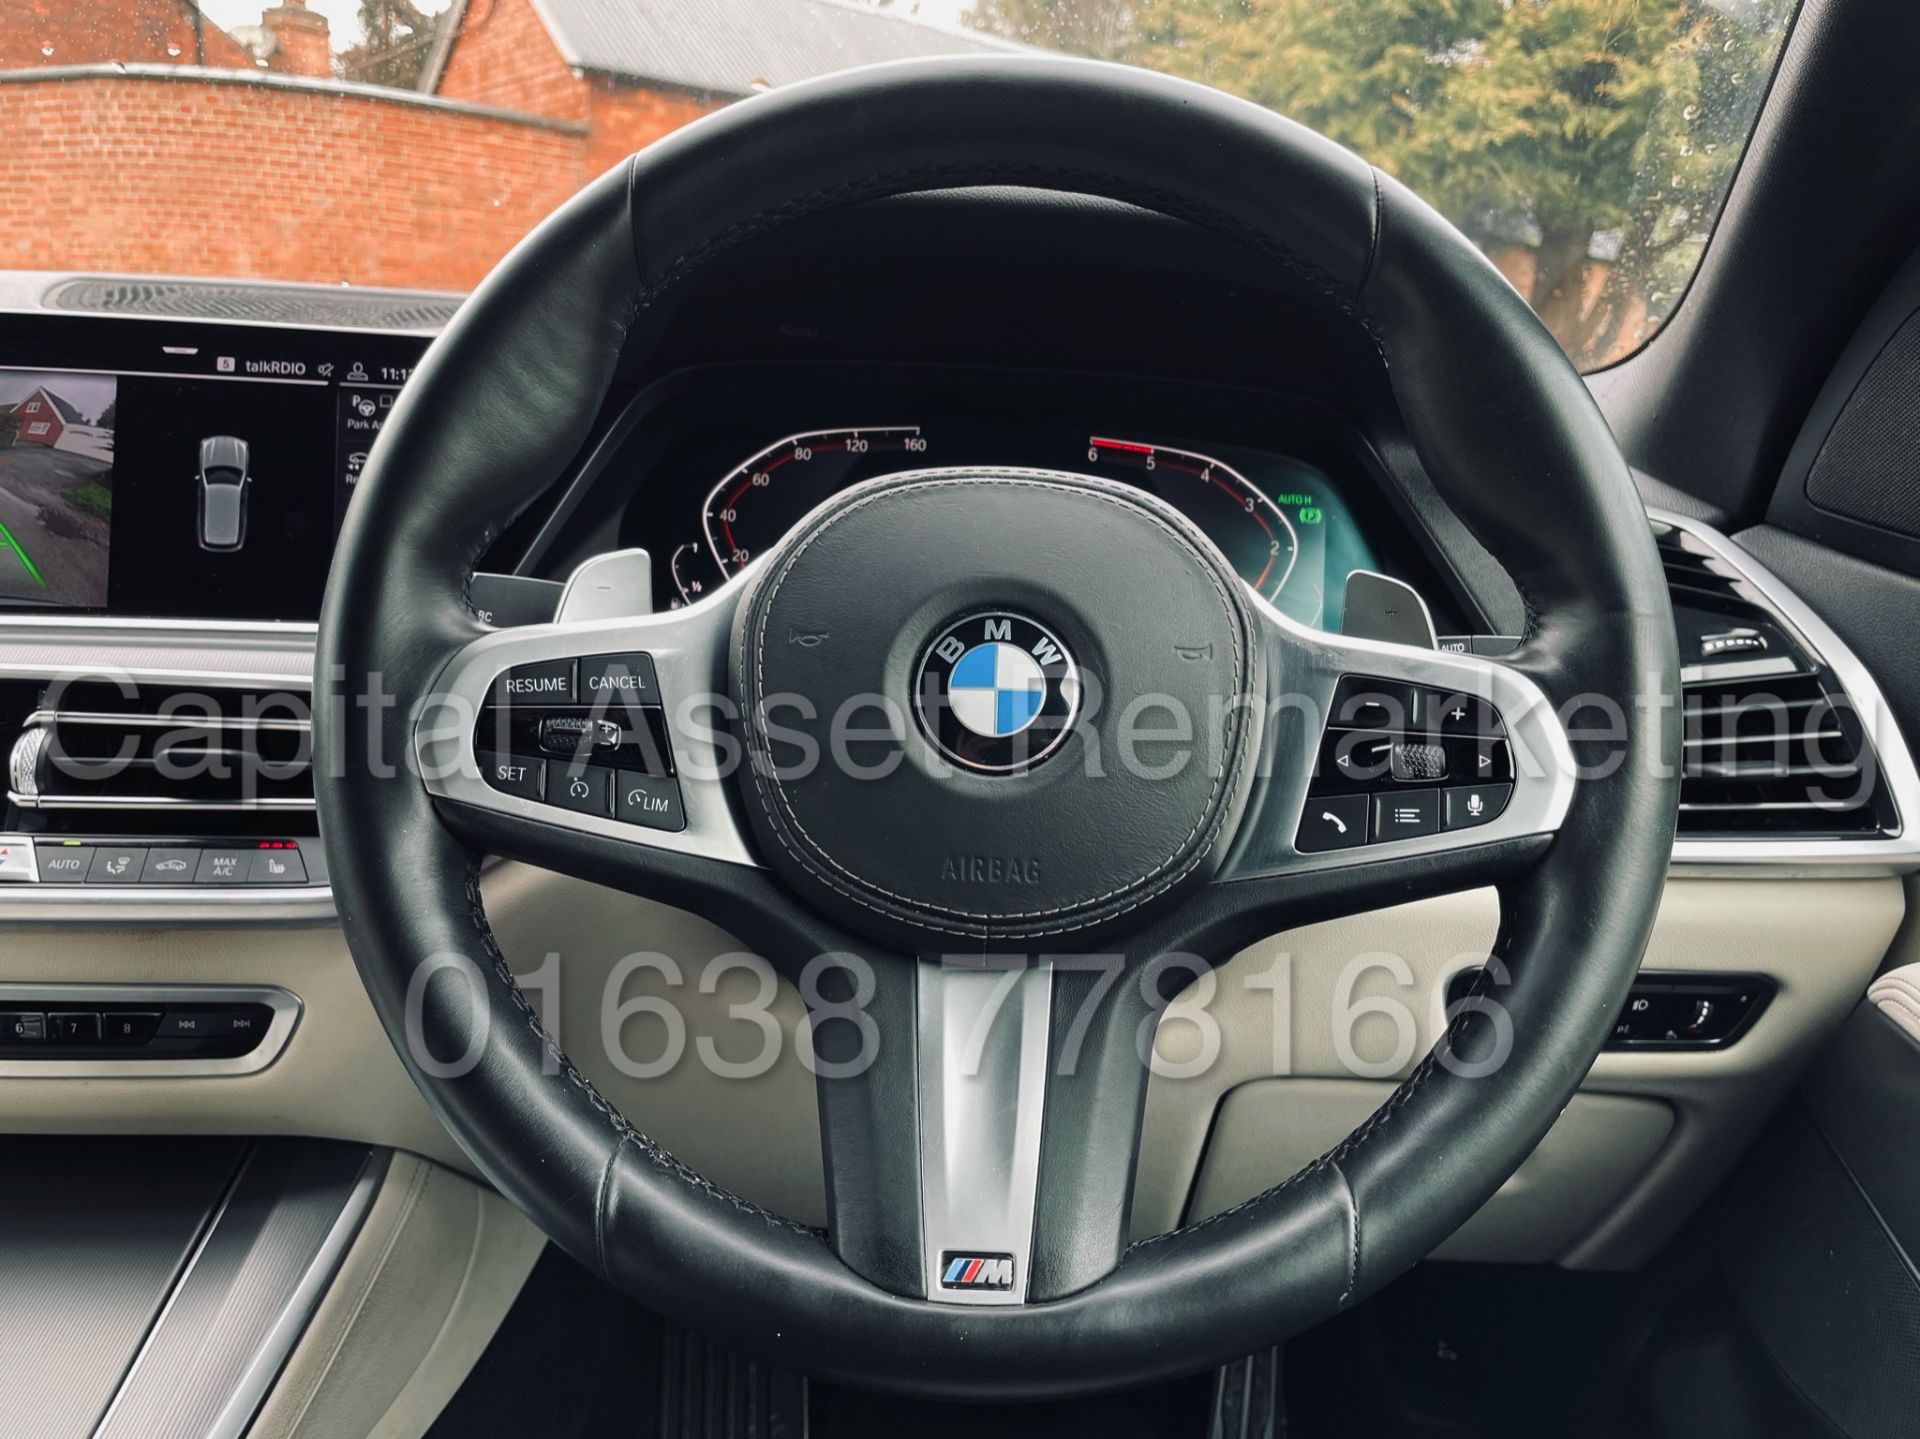 (On Sale) BMW X5 *M SPORT* X-DRIVE *7 SEATER* (2019-EURO 6) '3.0 DIESEL - AUTO' *SAT NAV & PAN ROOF* - Image 68 of 70